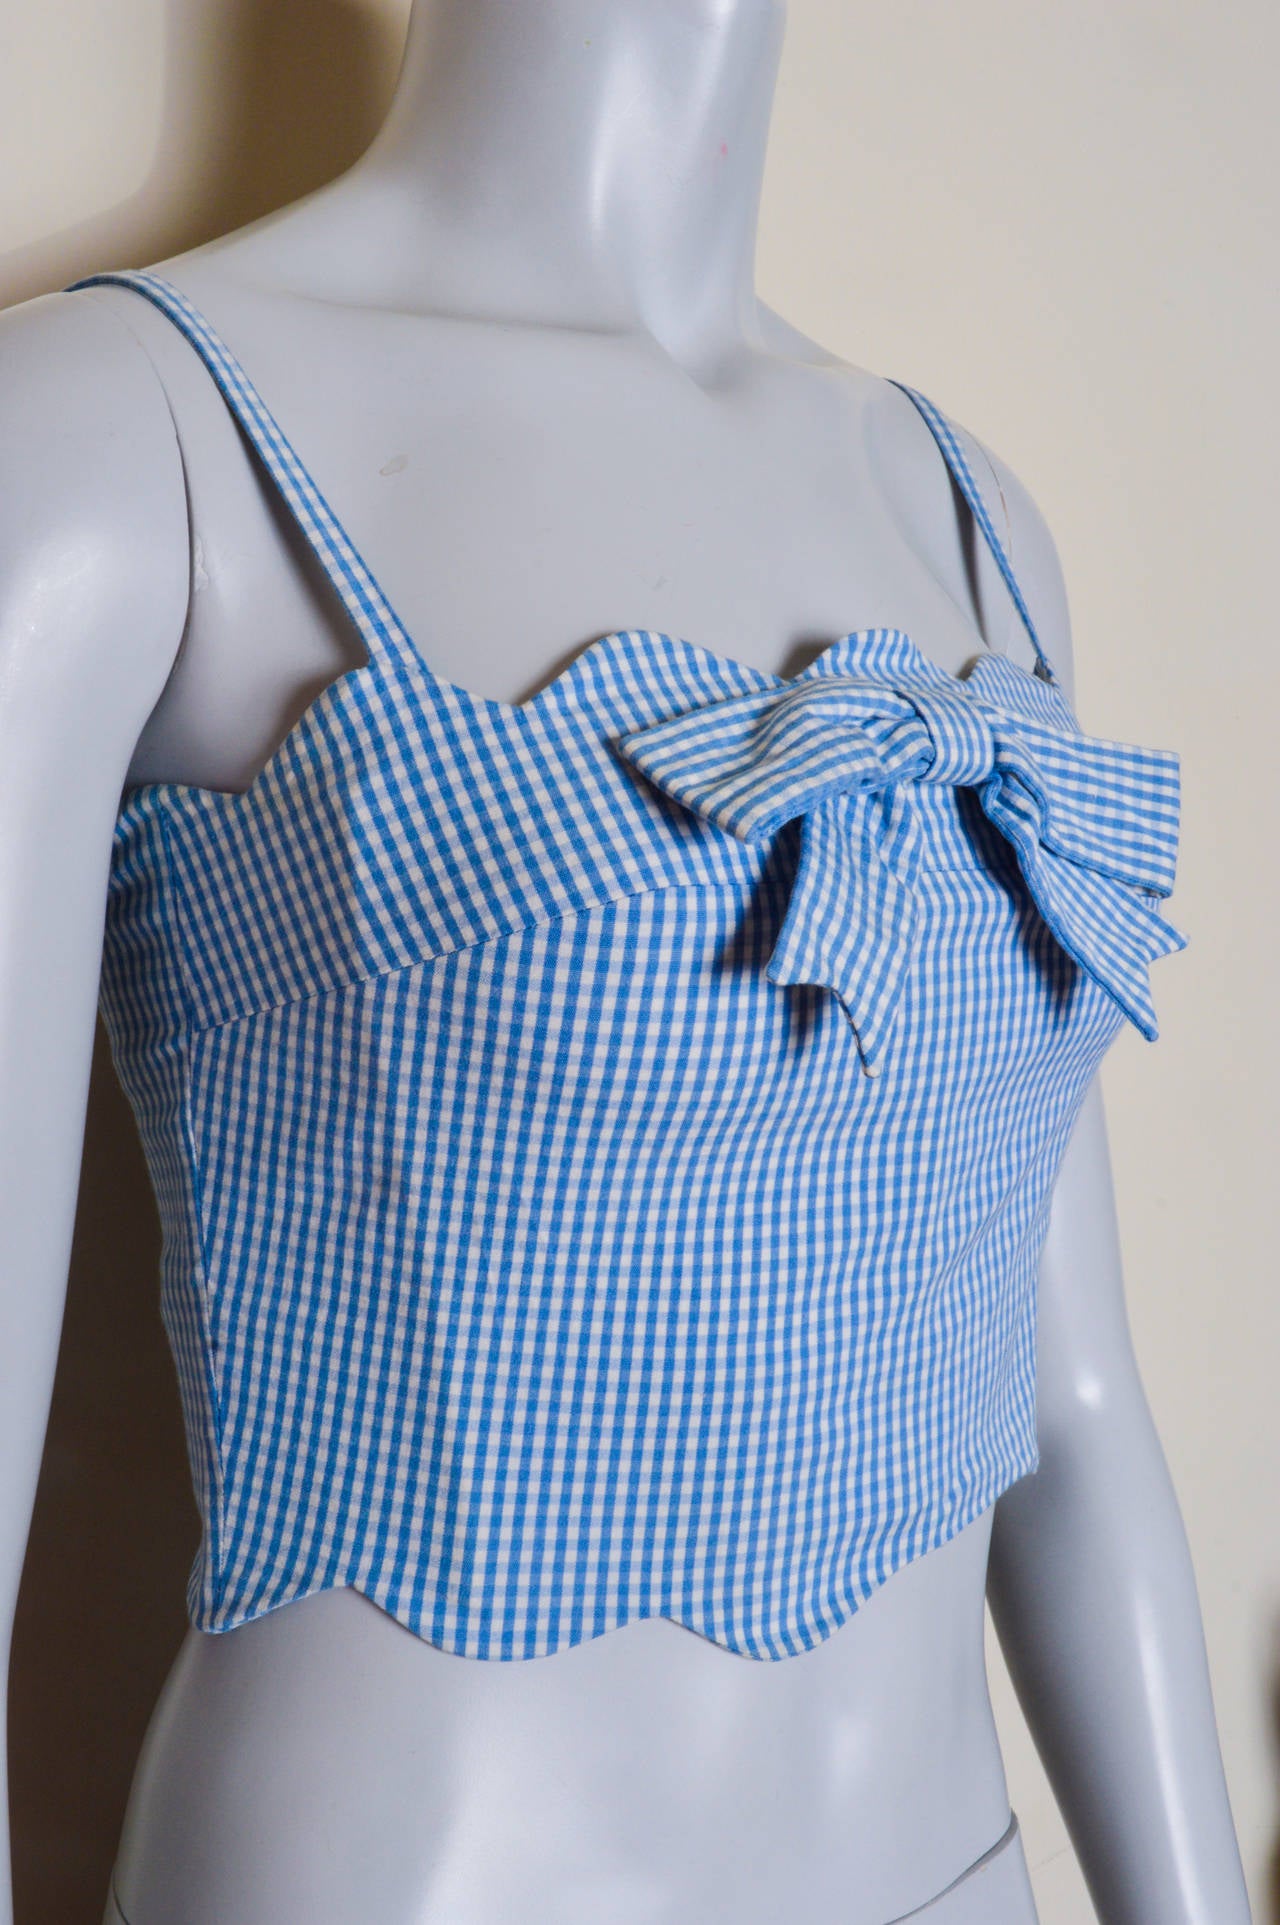 Pale blue and white gingham check fitted top.
Scalloped neckline with bow.
Boning in liner for shape.
Darted bust. 
Spaghetti straps.
Back zipper.
Stretch.
Tagged a US size 6.